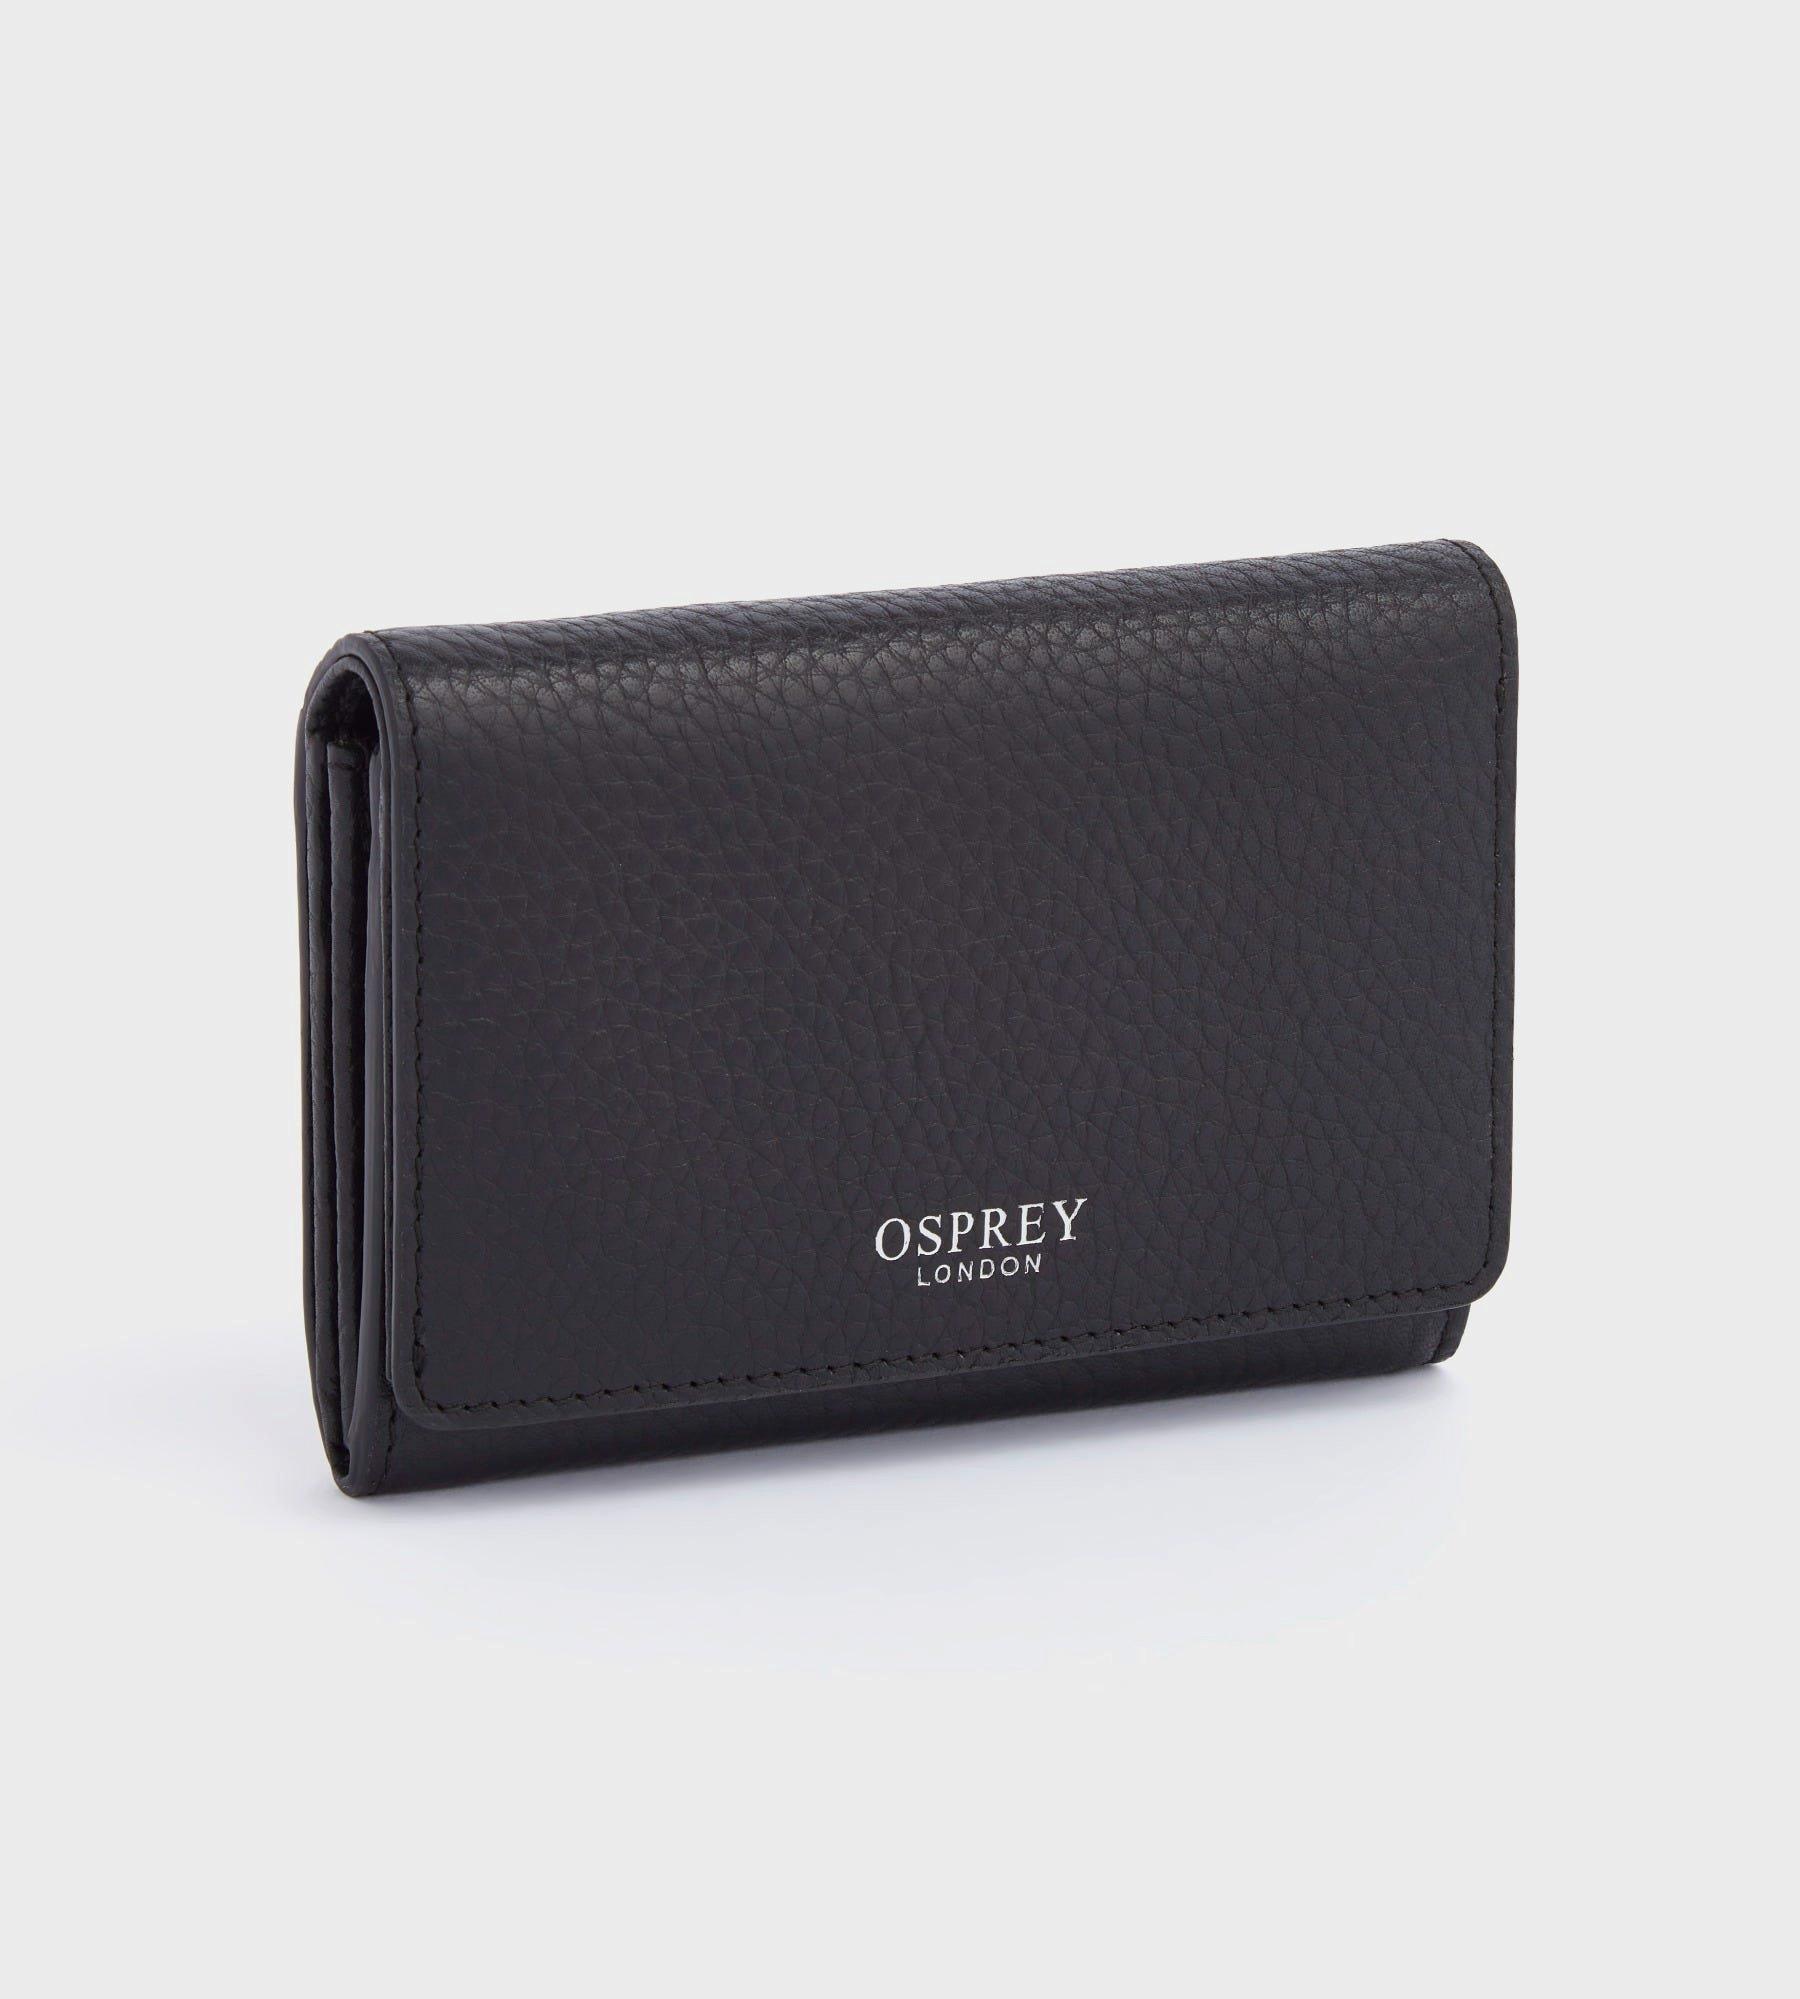 Bags & Purses | The Wilderness Small Leather Zip-Around Purse | OSPREY  LONDON